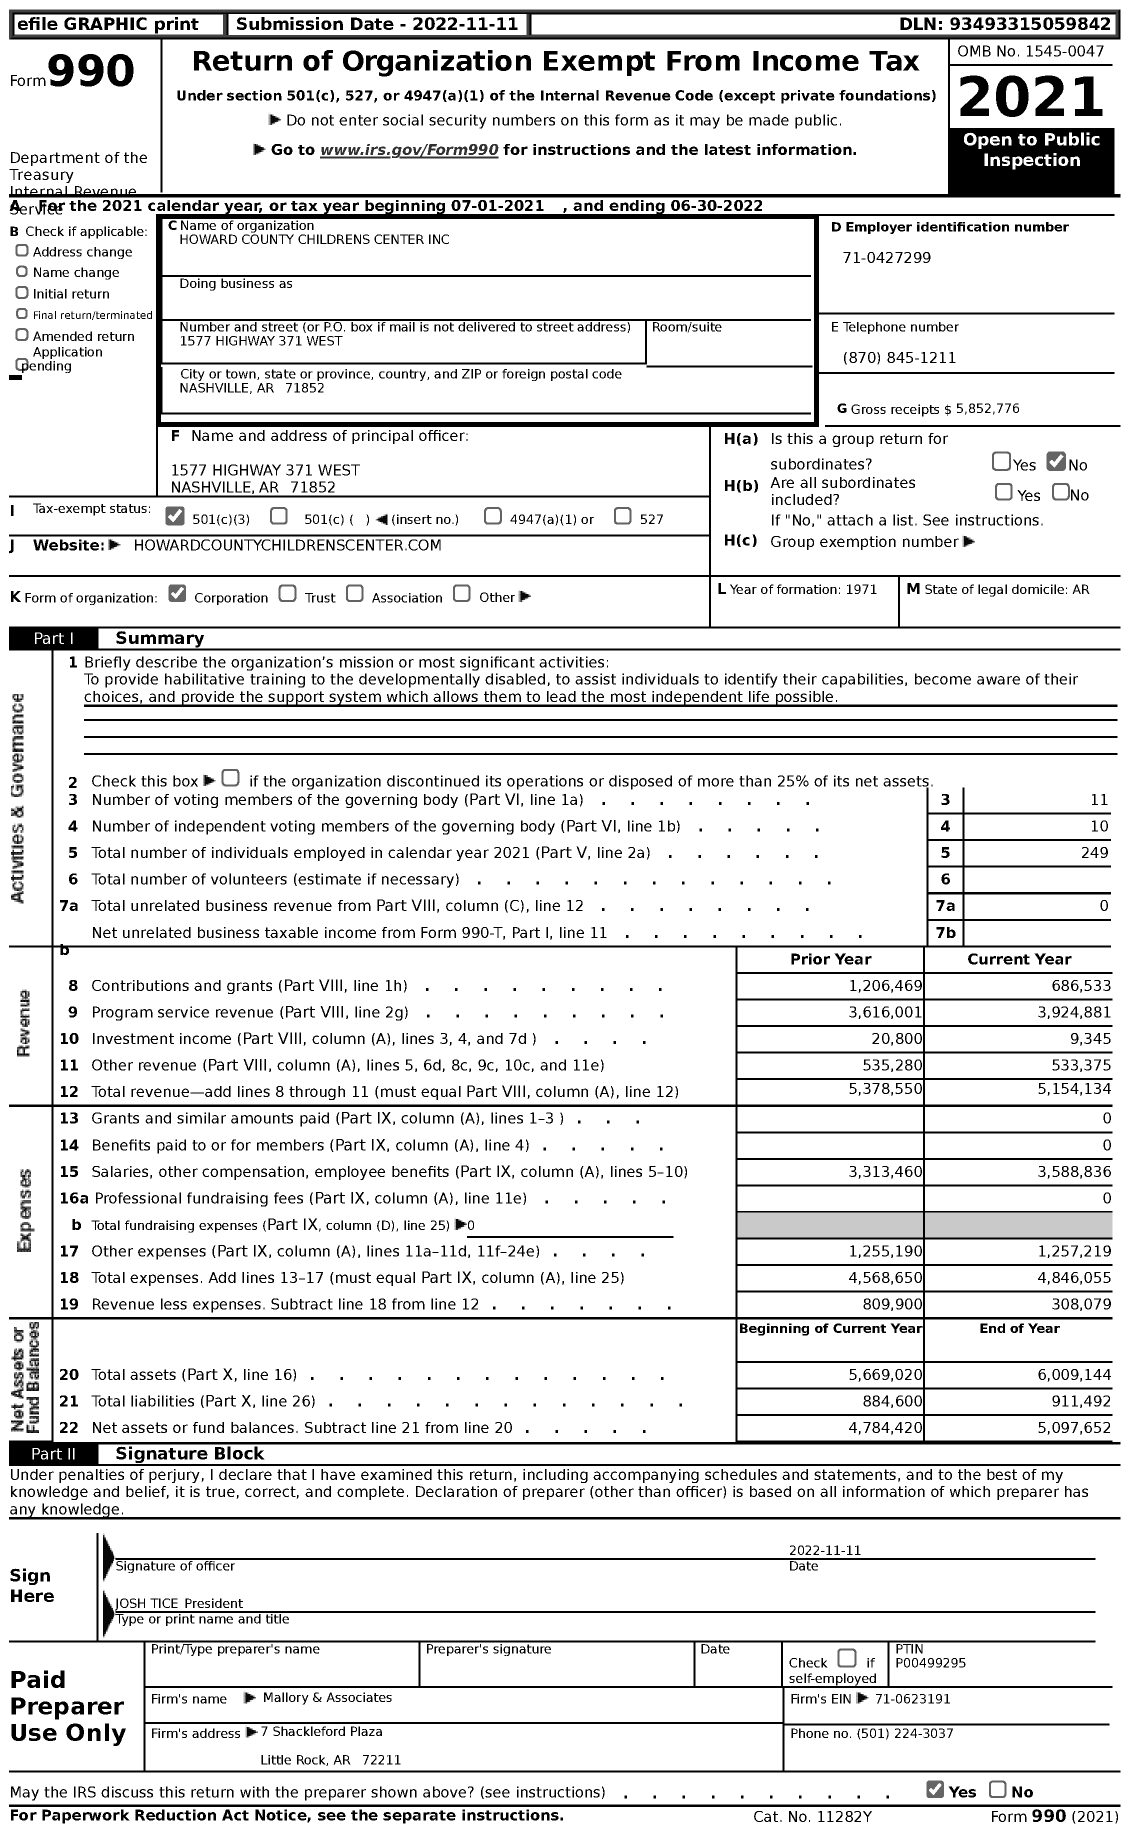 Image of first page of 2021 Form 990 for Howard County Children's Center (HCCC)